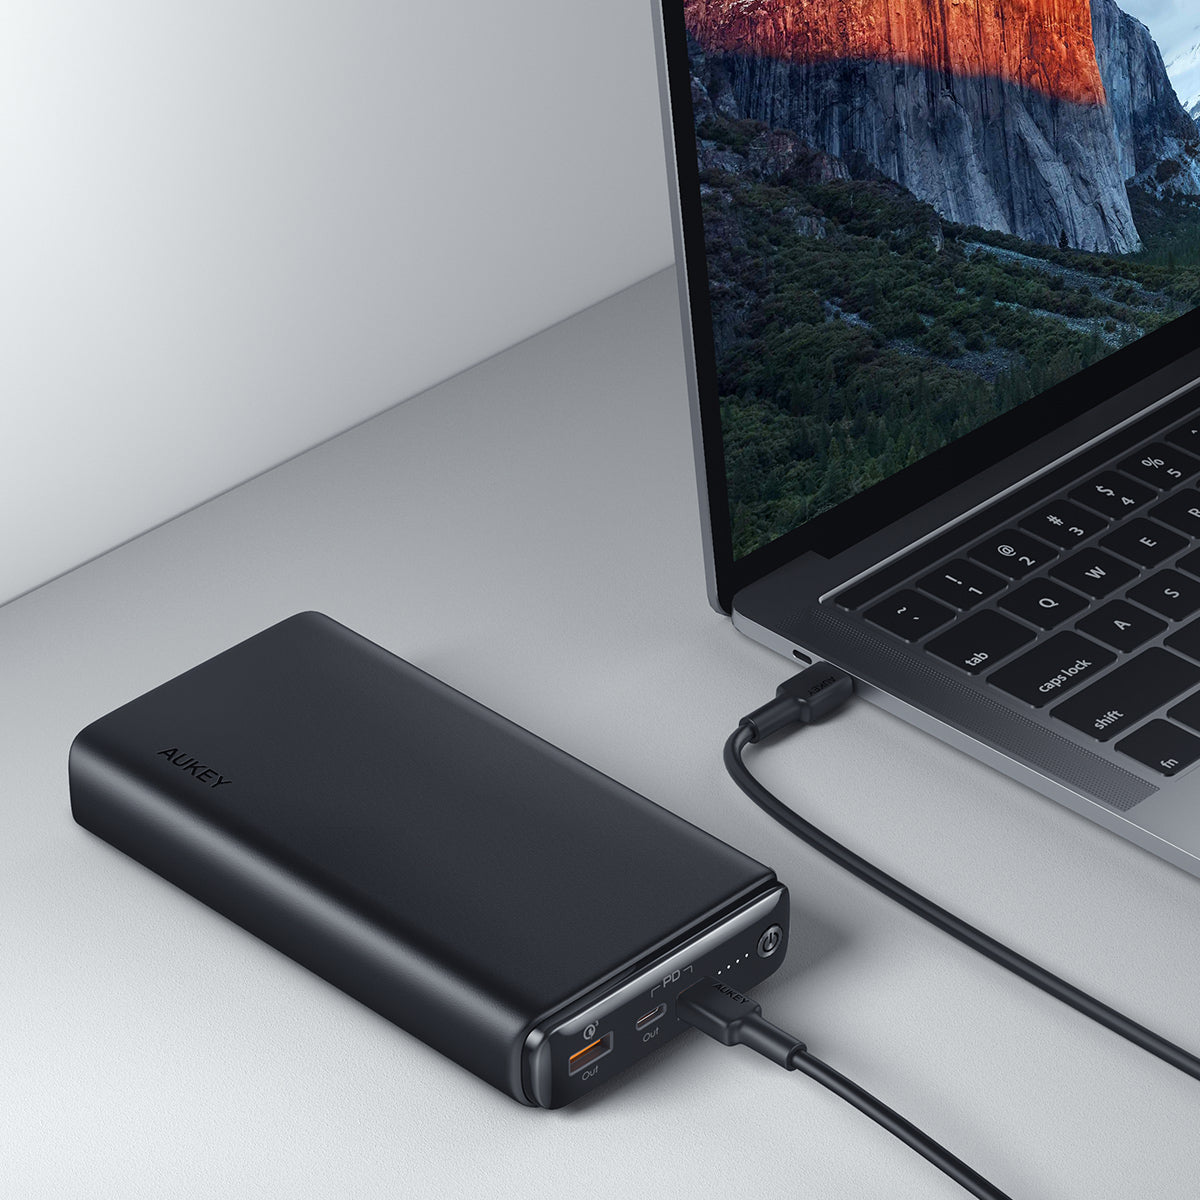 Beregn Plante nordøst Power Bank: Can You Can Charge a Laptop With One? Yes, You Can! – Aukey  Singapore